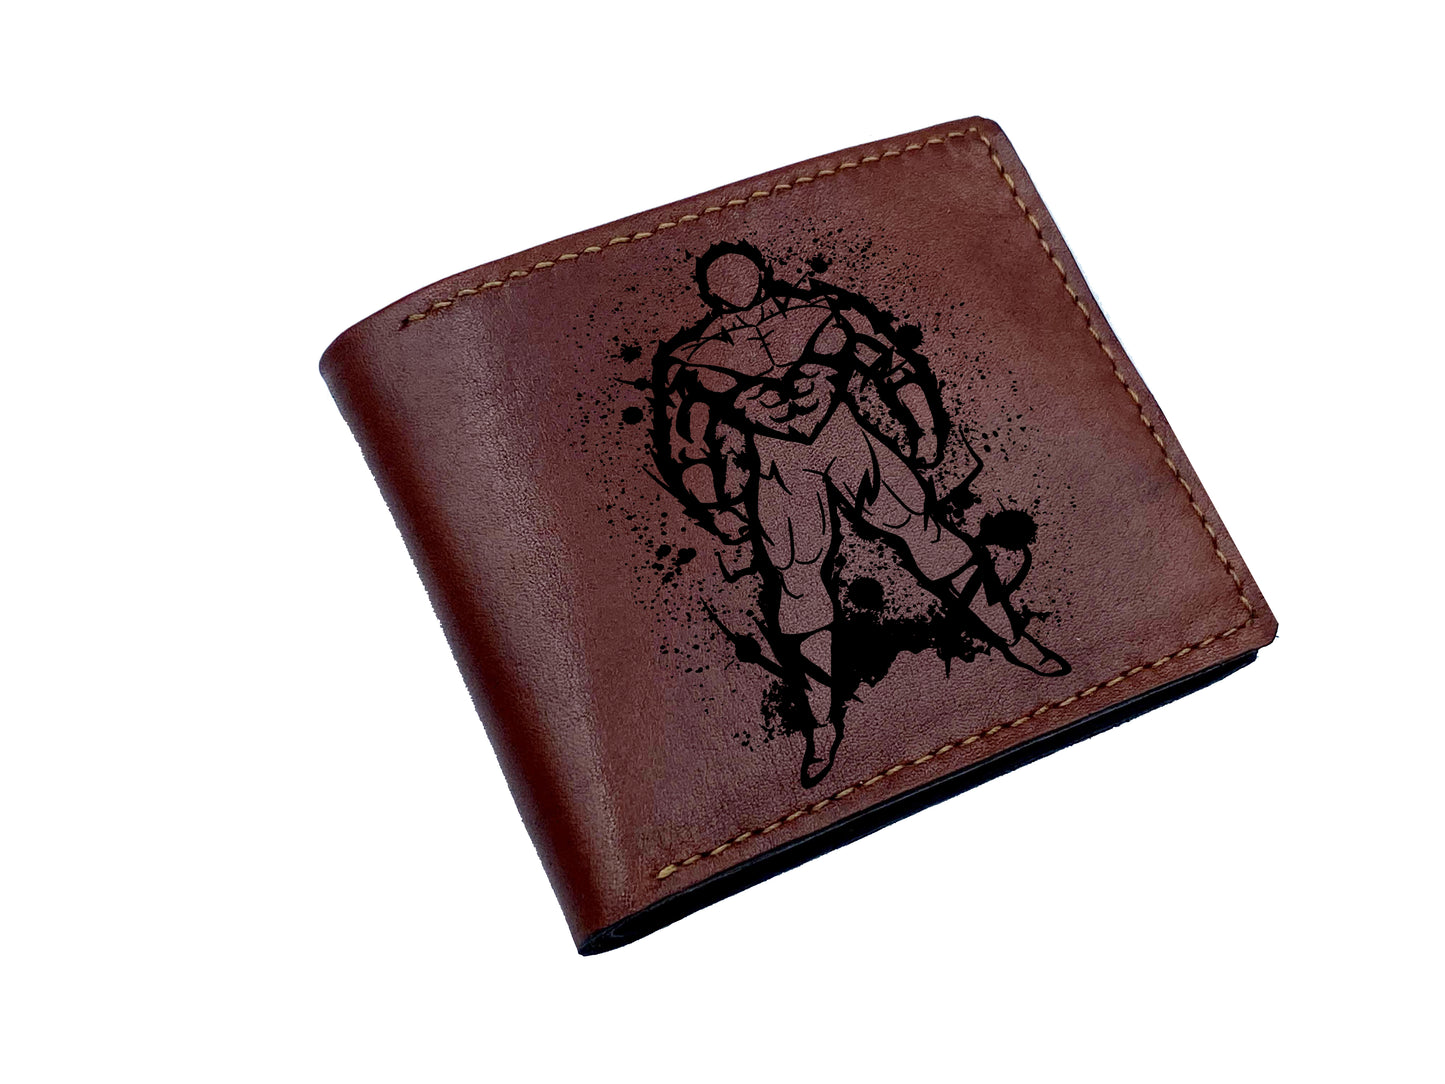 Mayan Corner - Customized anime art leather wallet, Cell transform dragon ball wallet, cute leather gift for friend, brother